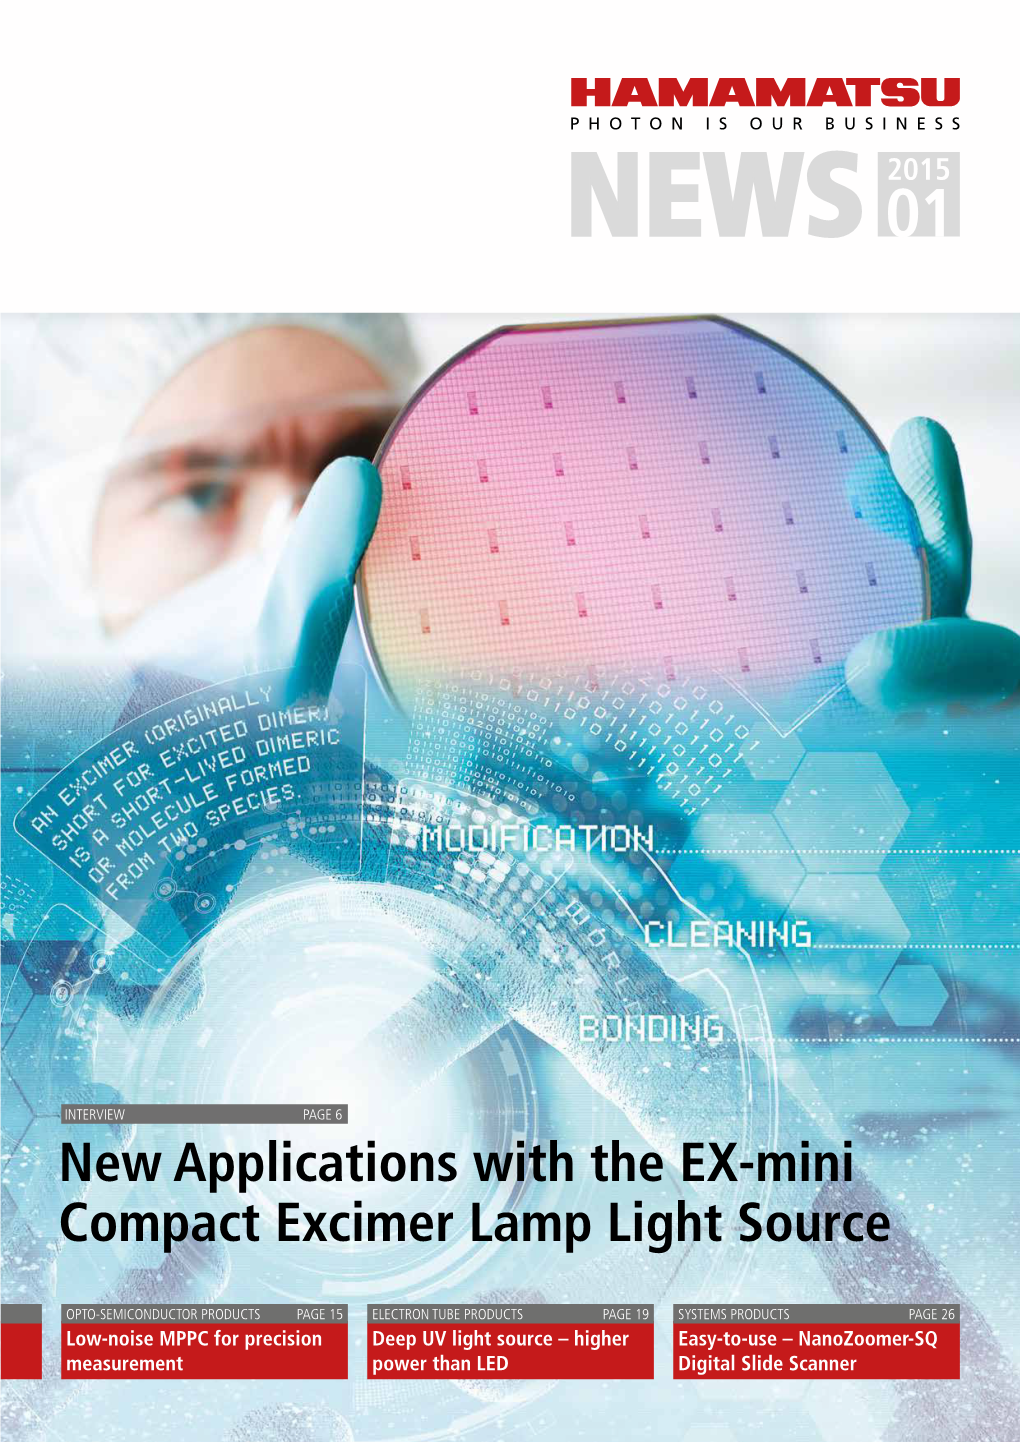 New Applications with the EX-Mini Compact Excimer Lamp Light Source